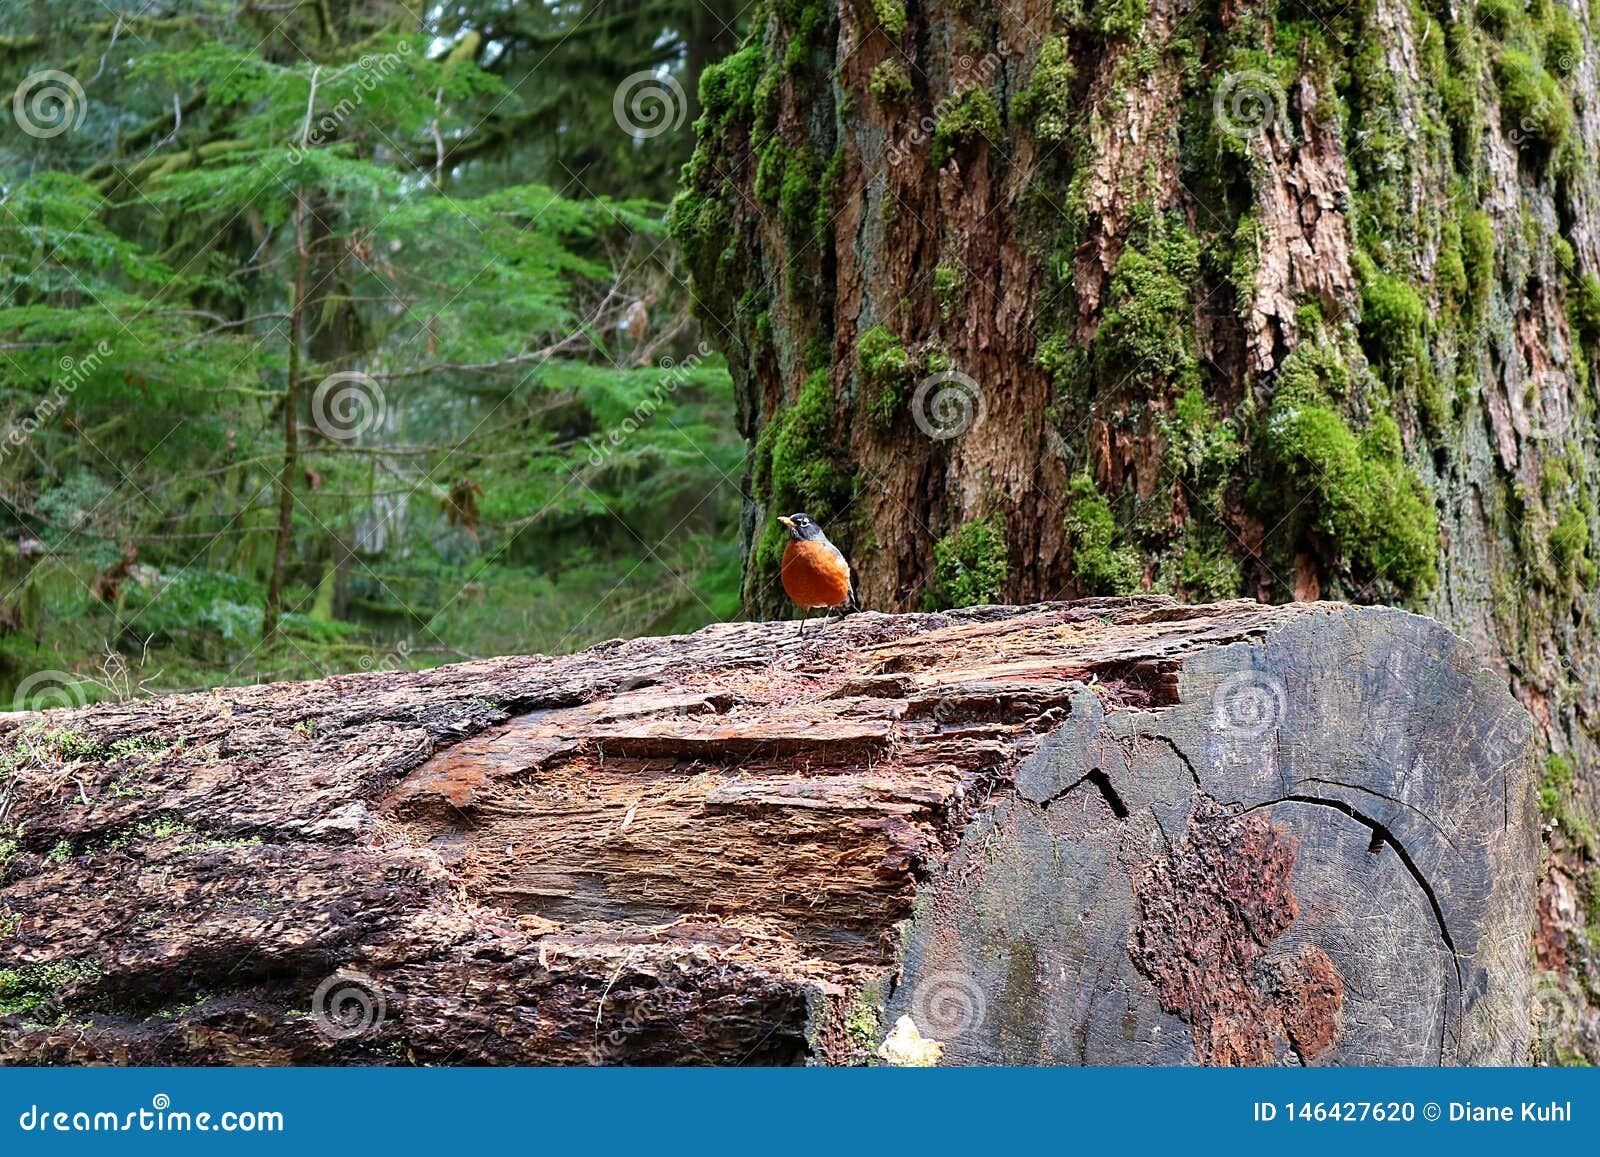 cheery robin perched on huge log in cathedral grove